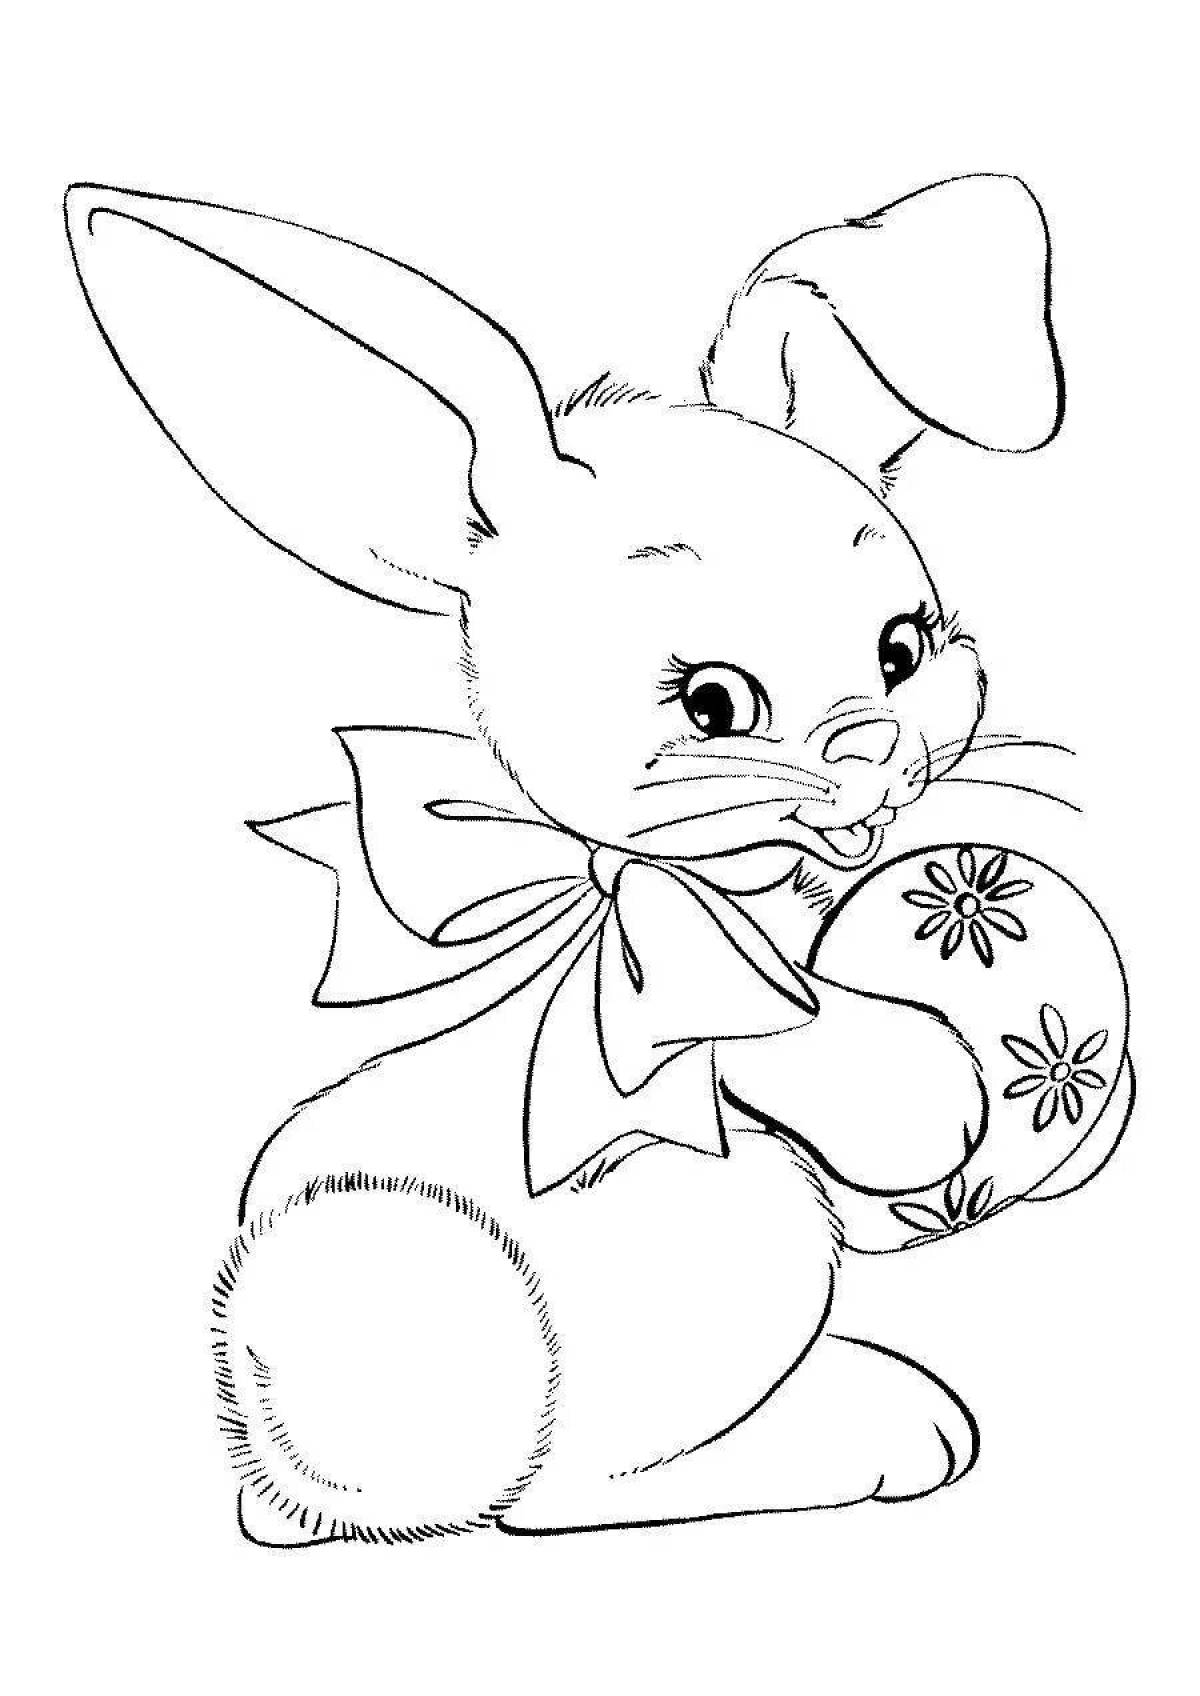 Coloring book New Year's rabbit filled with colors